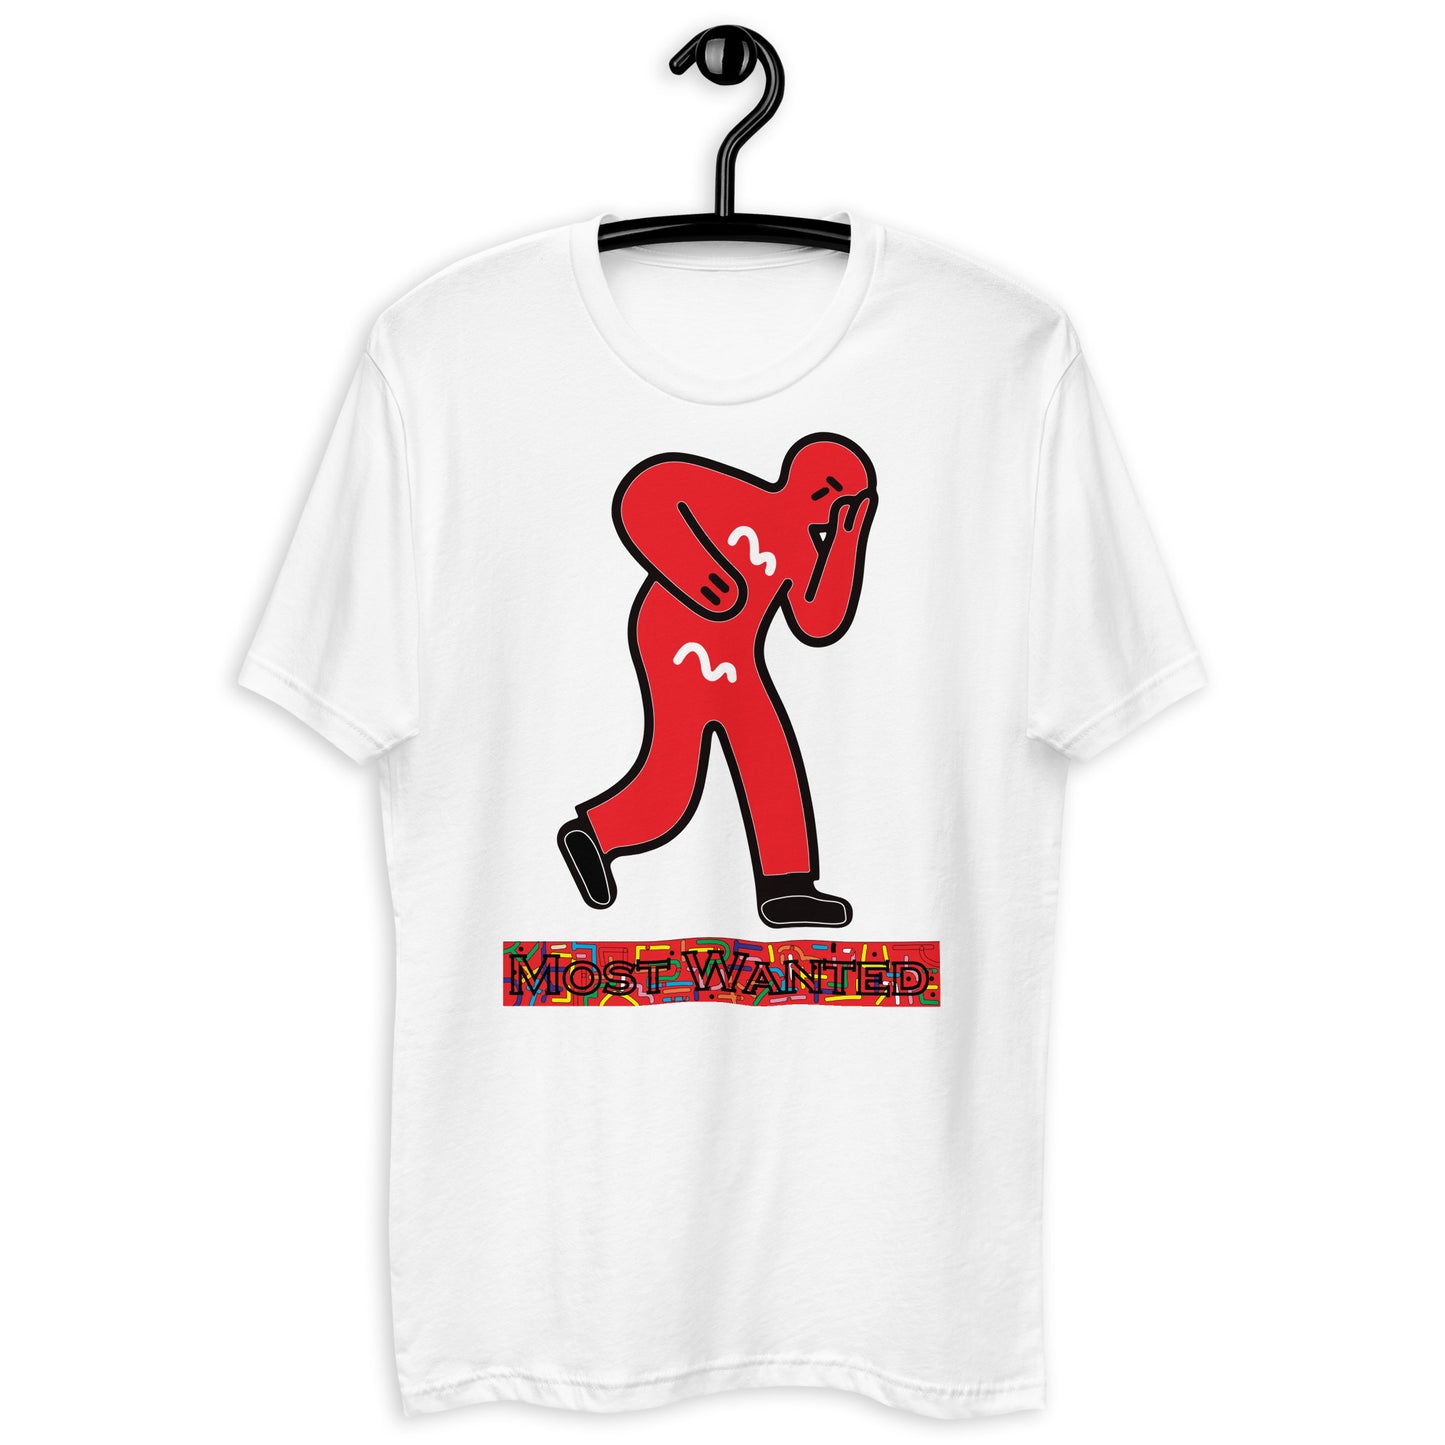 Doodles Me "Most Wanted" T-shirt #8